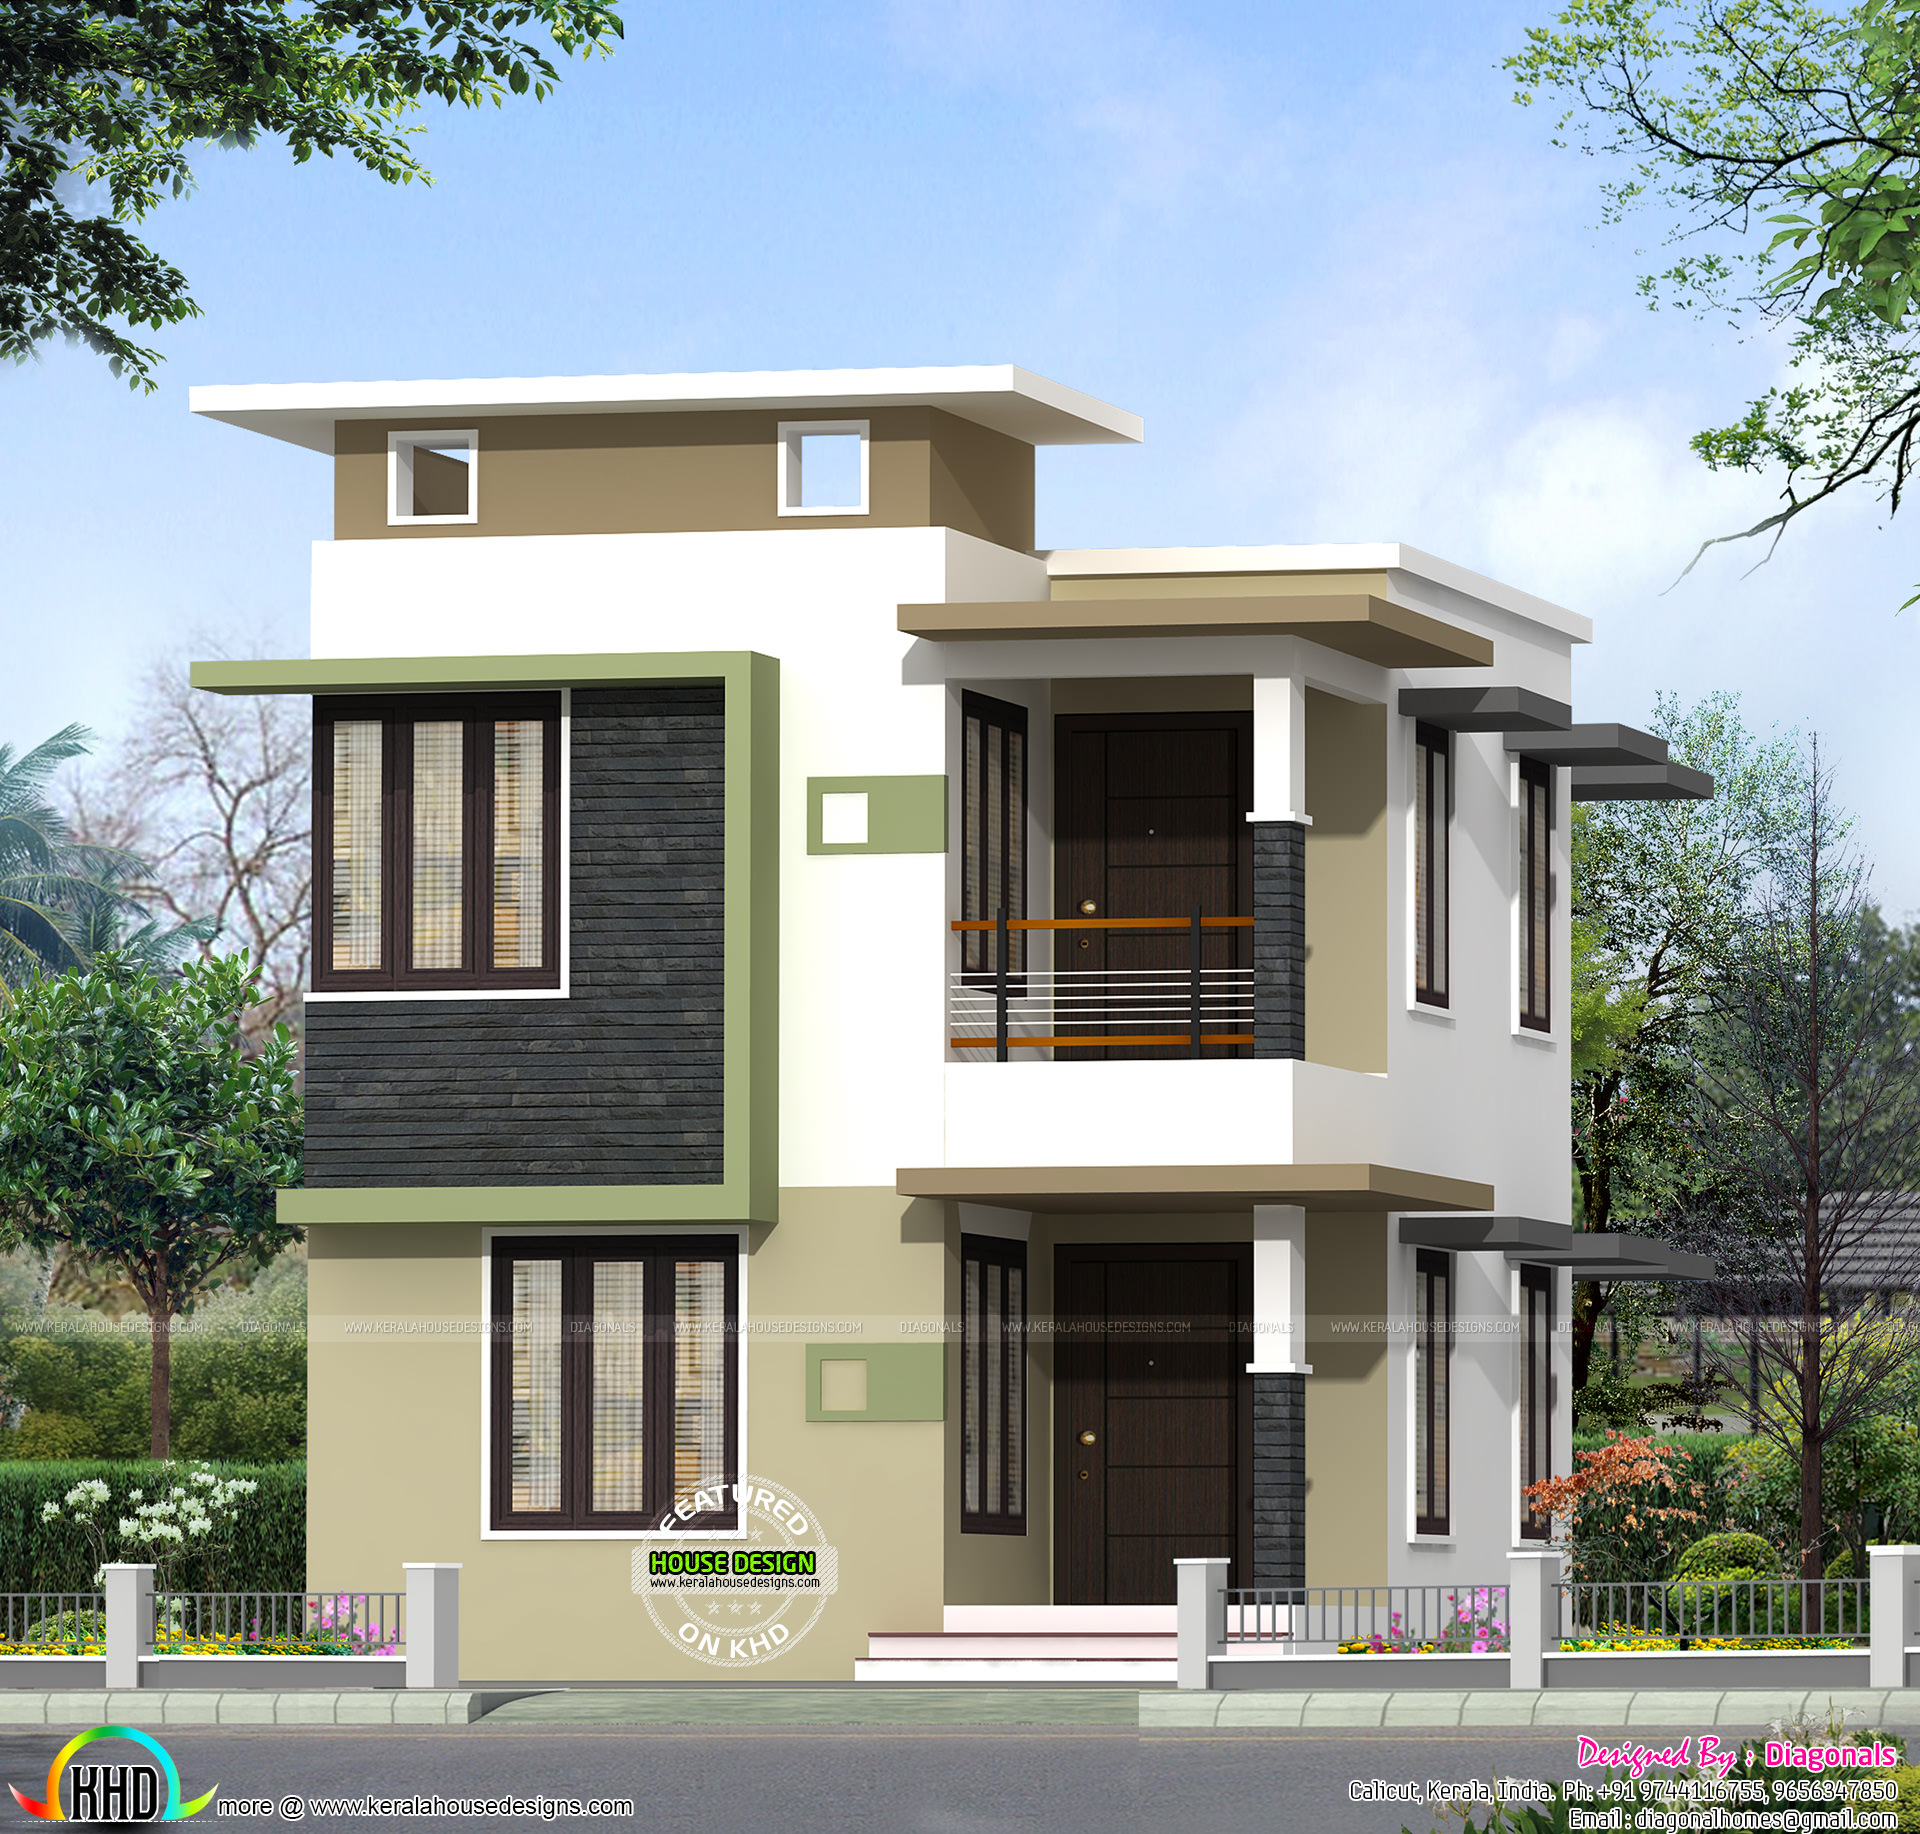 Image Result For Front Elevation Designs For Duplex Houses In